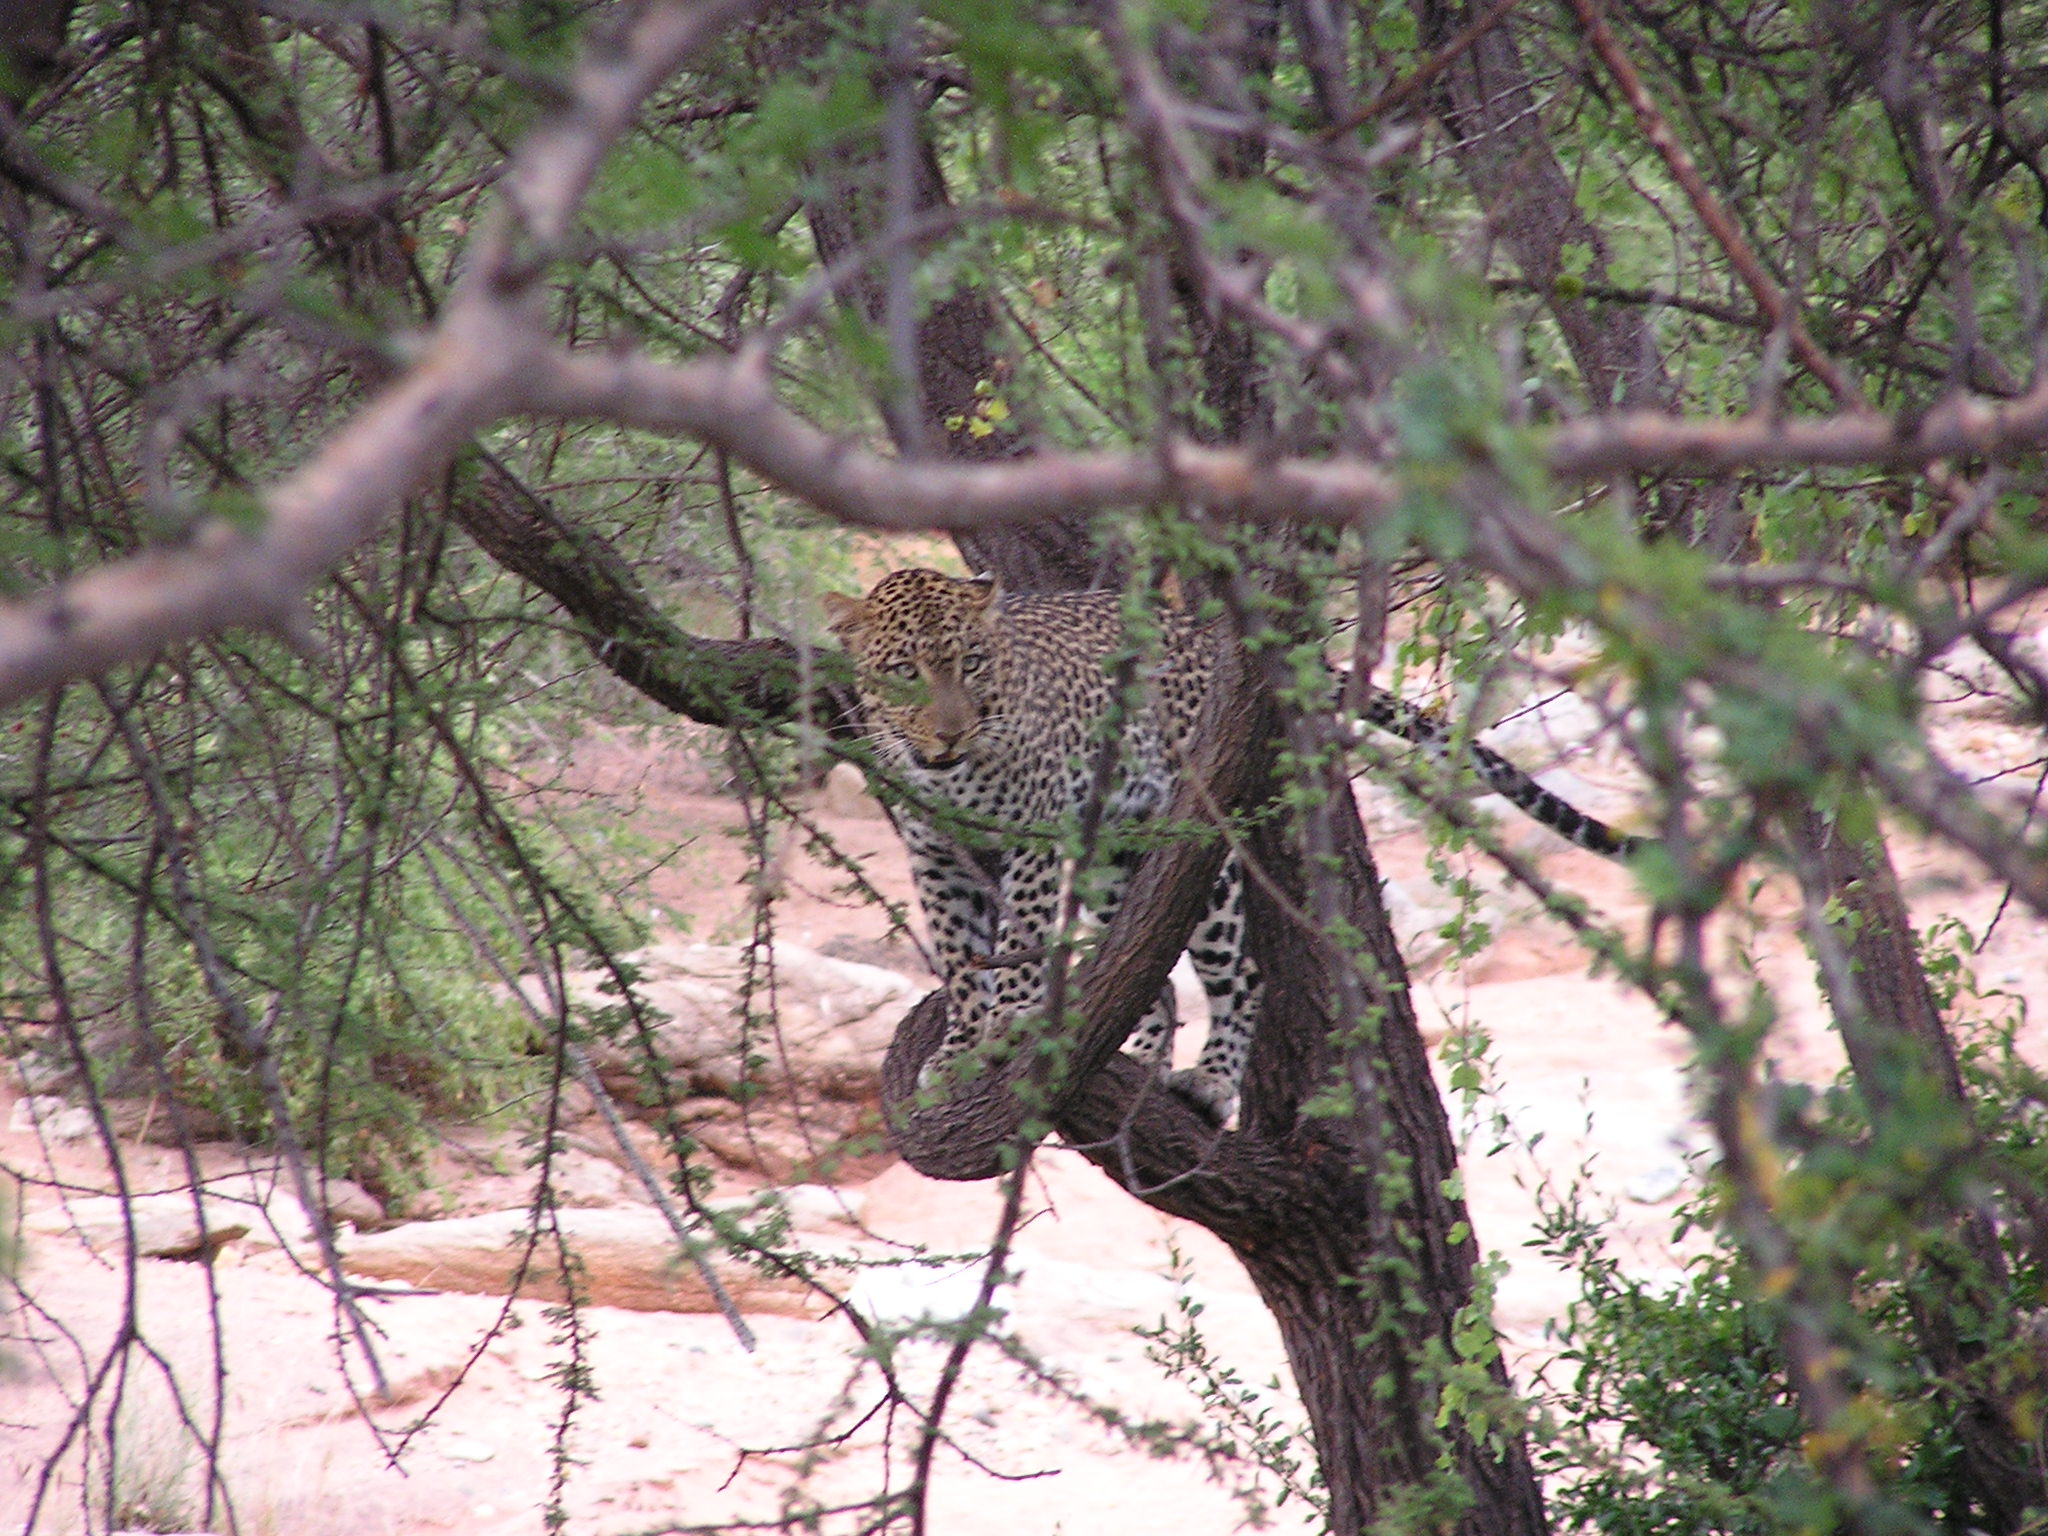 Leopard hiding out of reach of the hyena